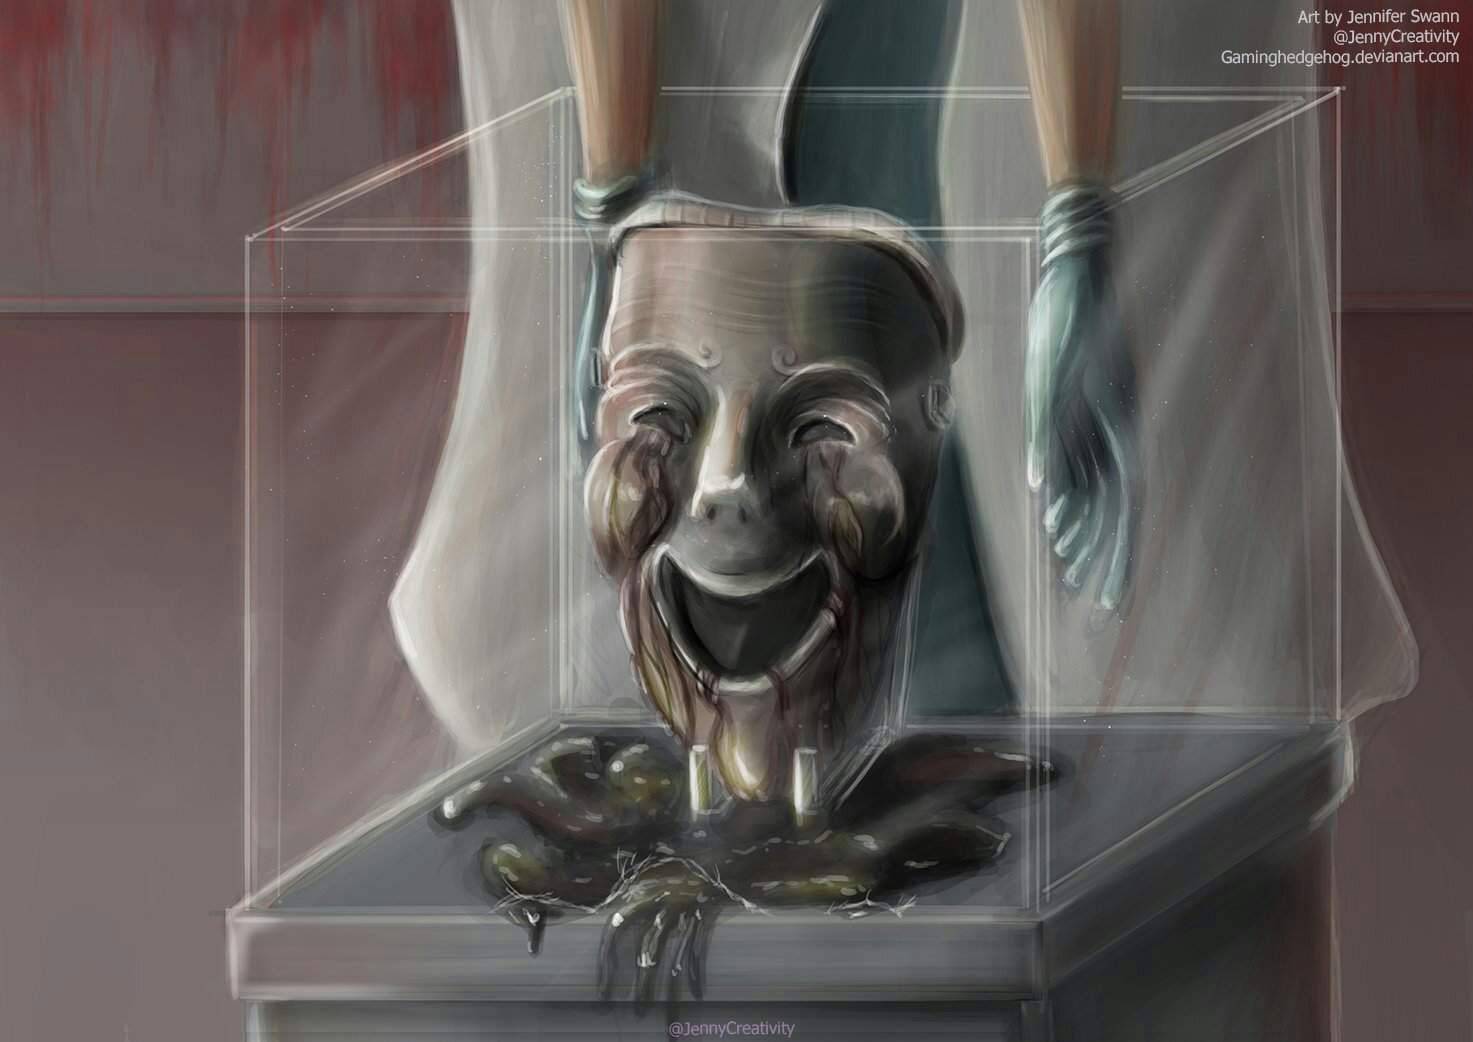 scary pictures -scp = scp 035 art - Art by Jennifer Swann Gaminghedgehog.devianart.com